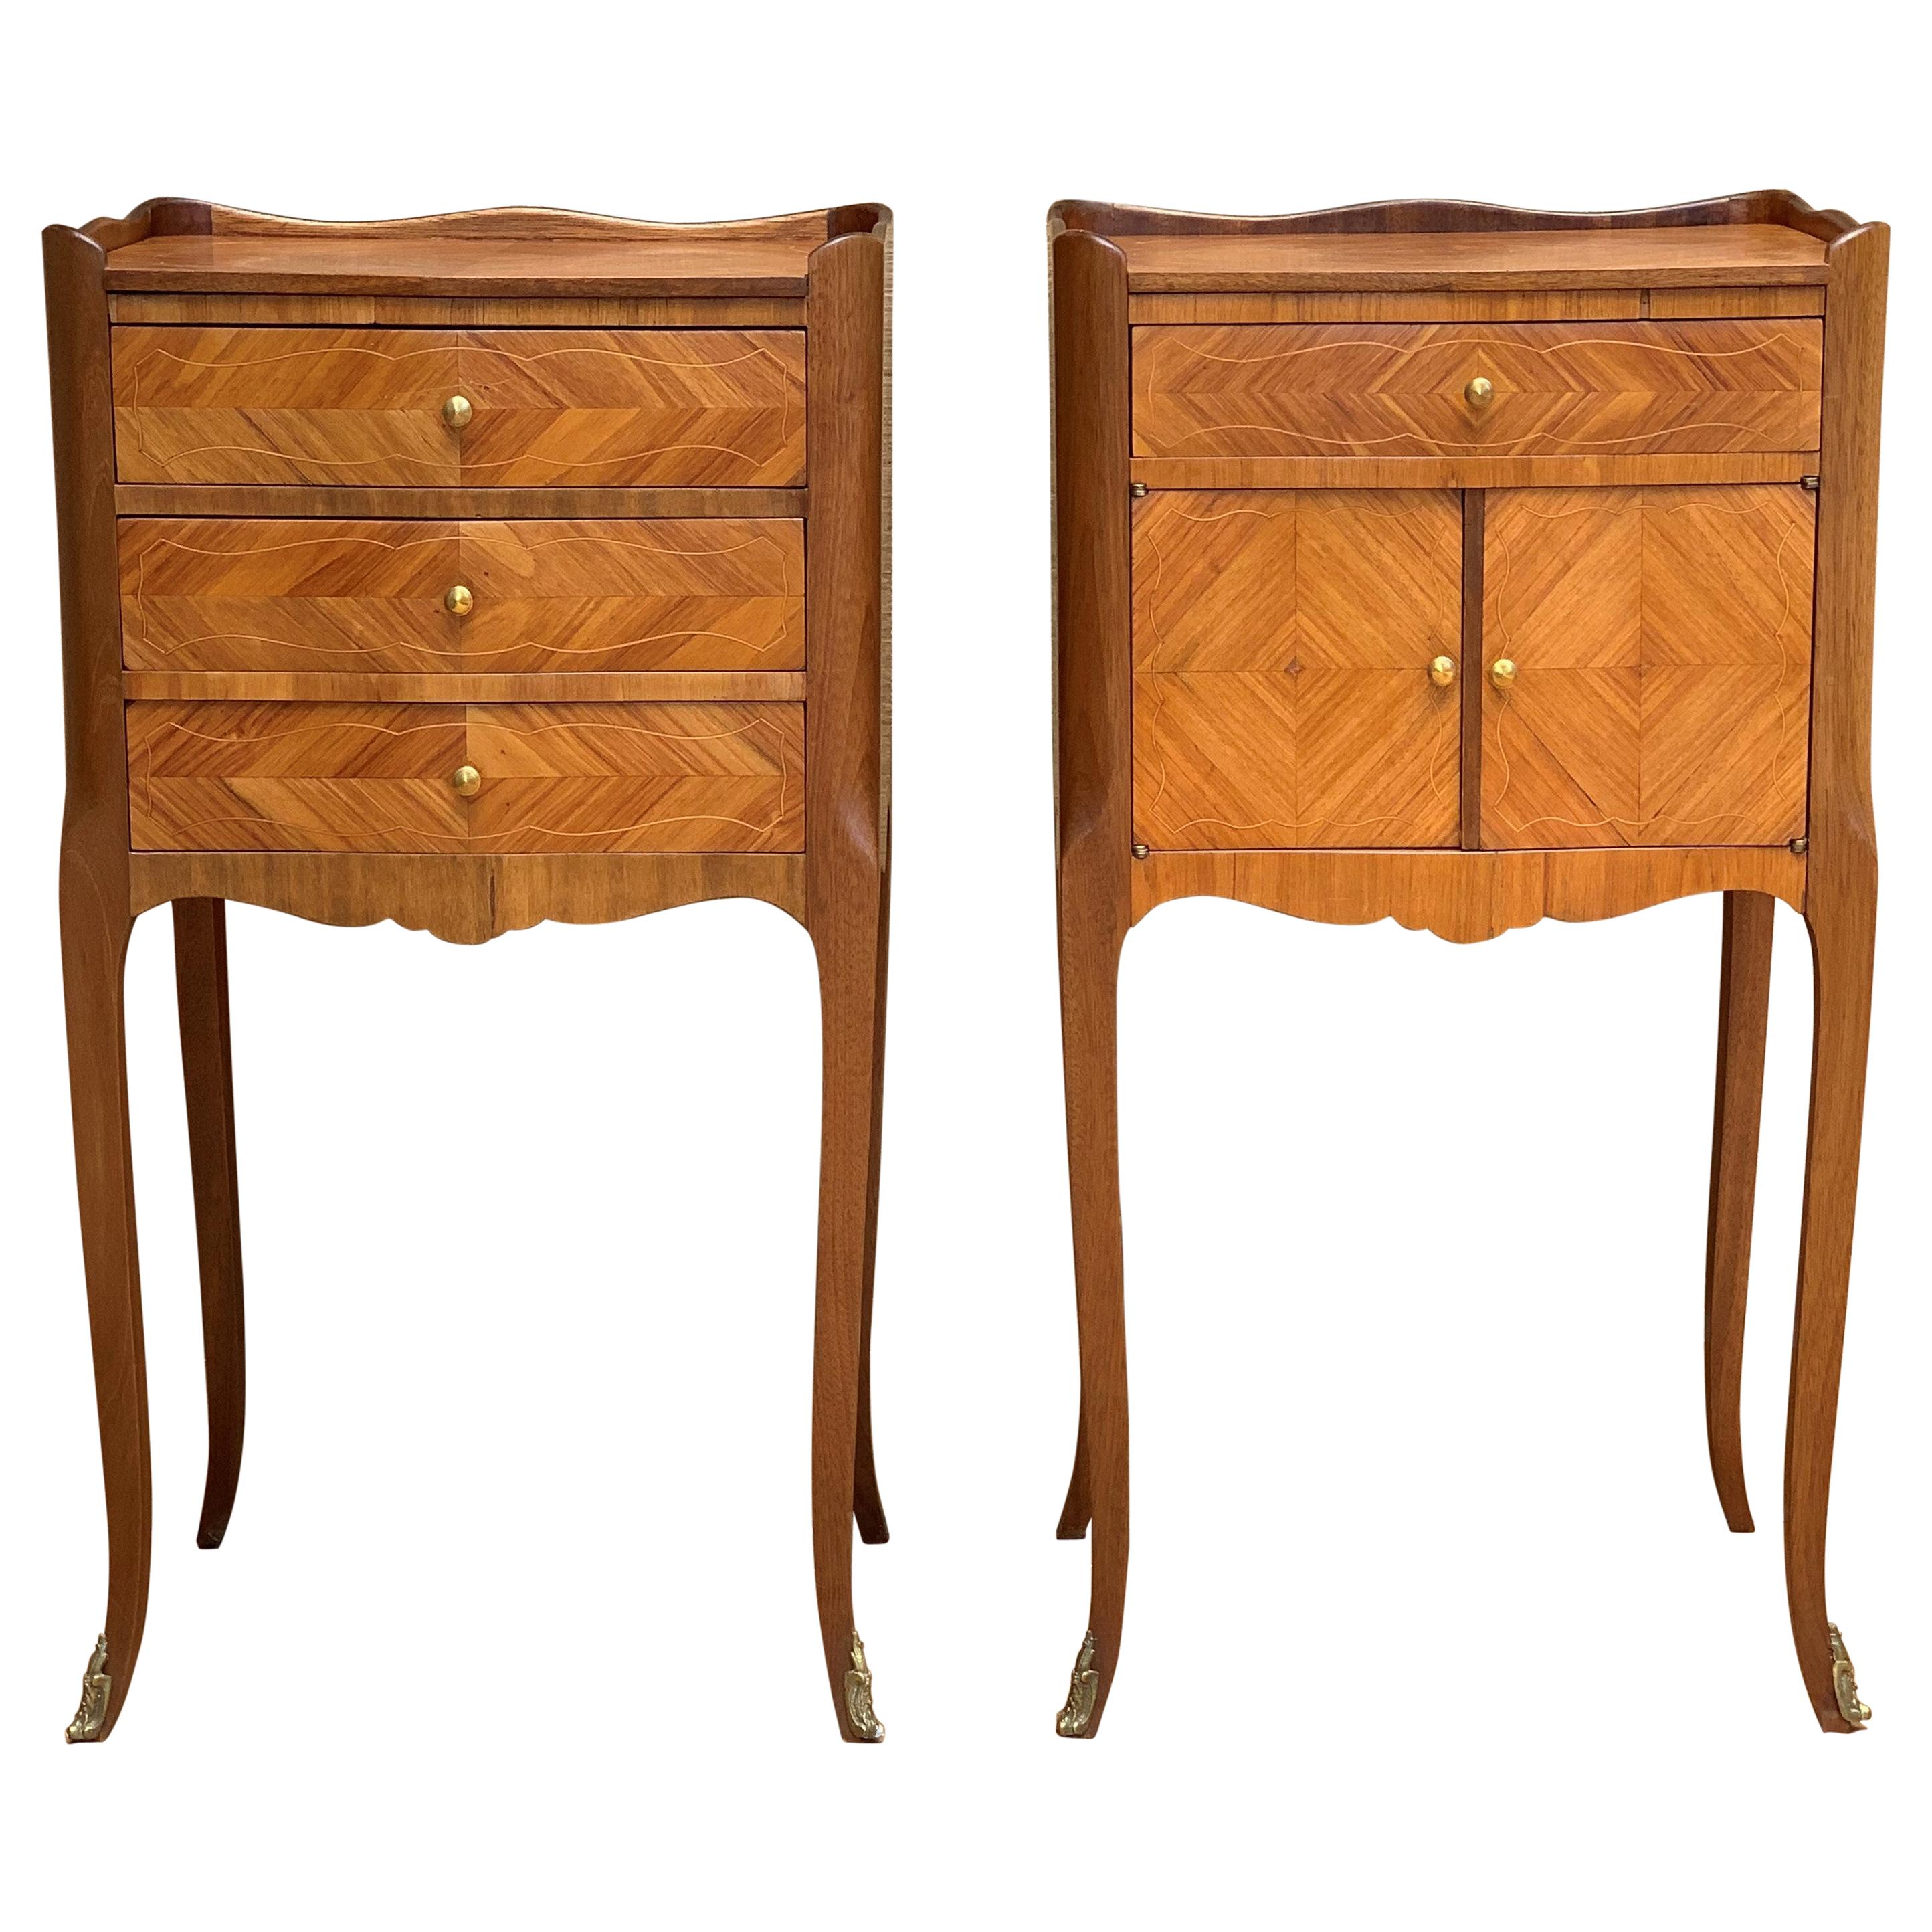 Pair of French Marquetry Walnut Bedside Matching Tables with Drawers and Door